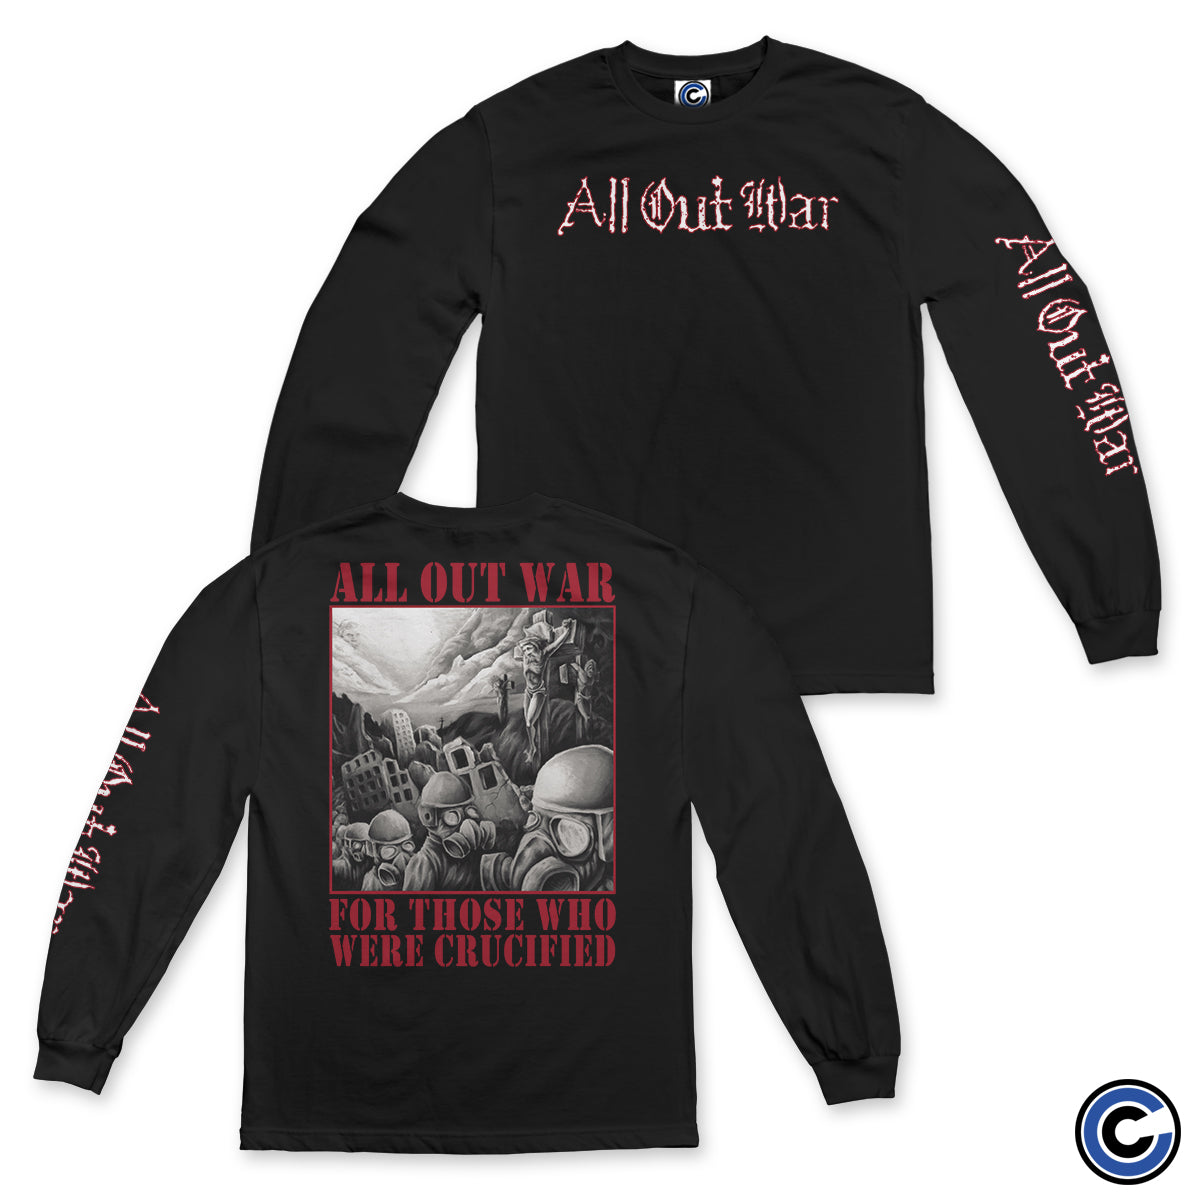 All Out War "For Those" Long Sleeve